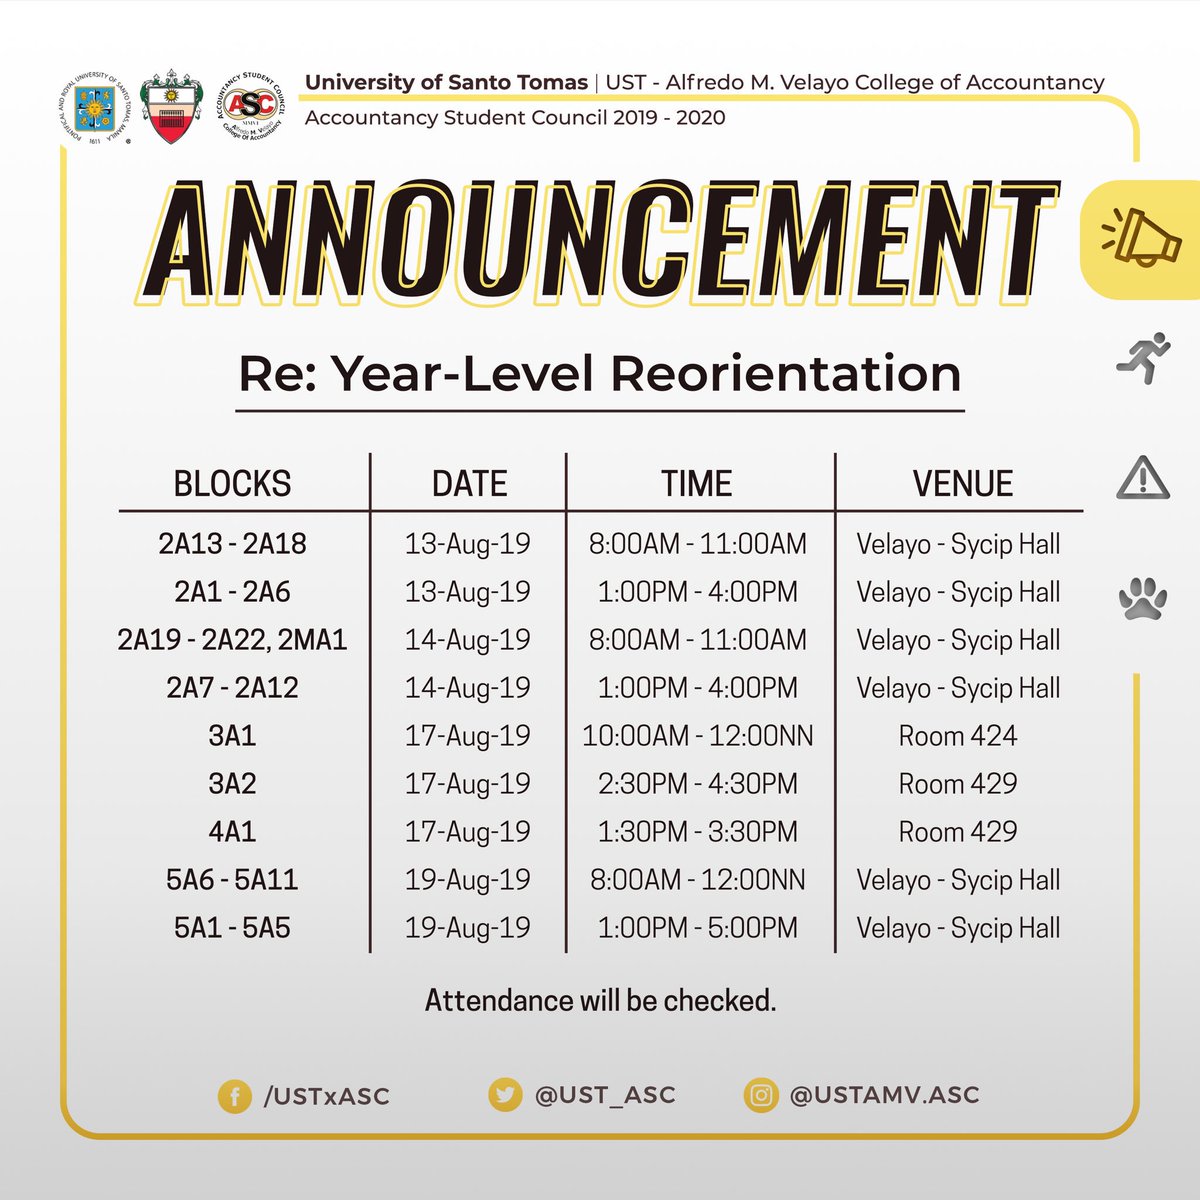 when to use please be guided accordingly